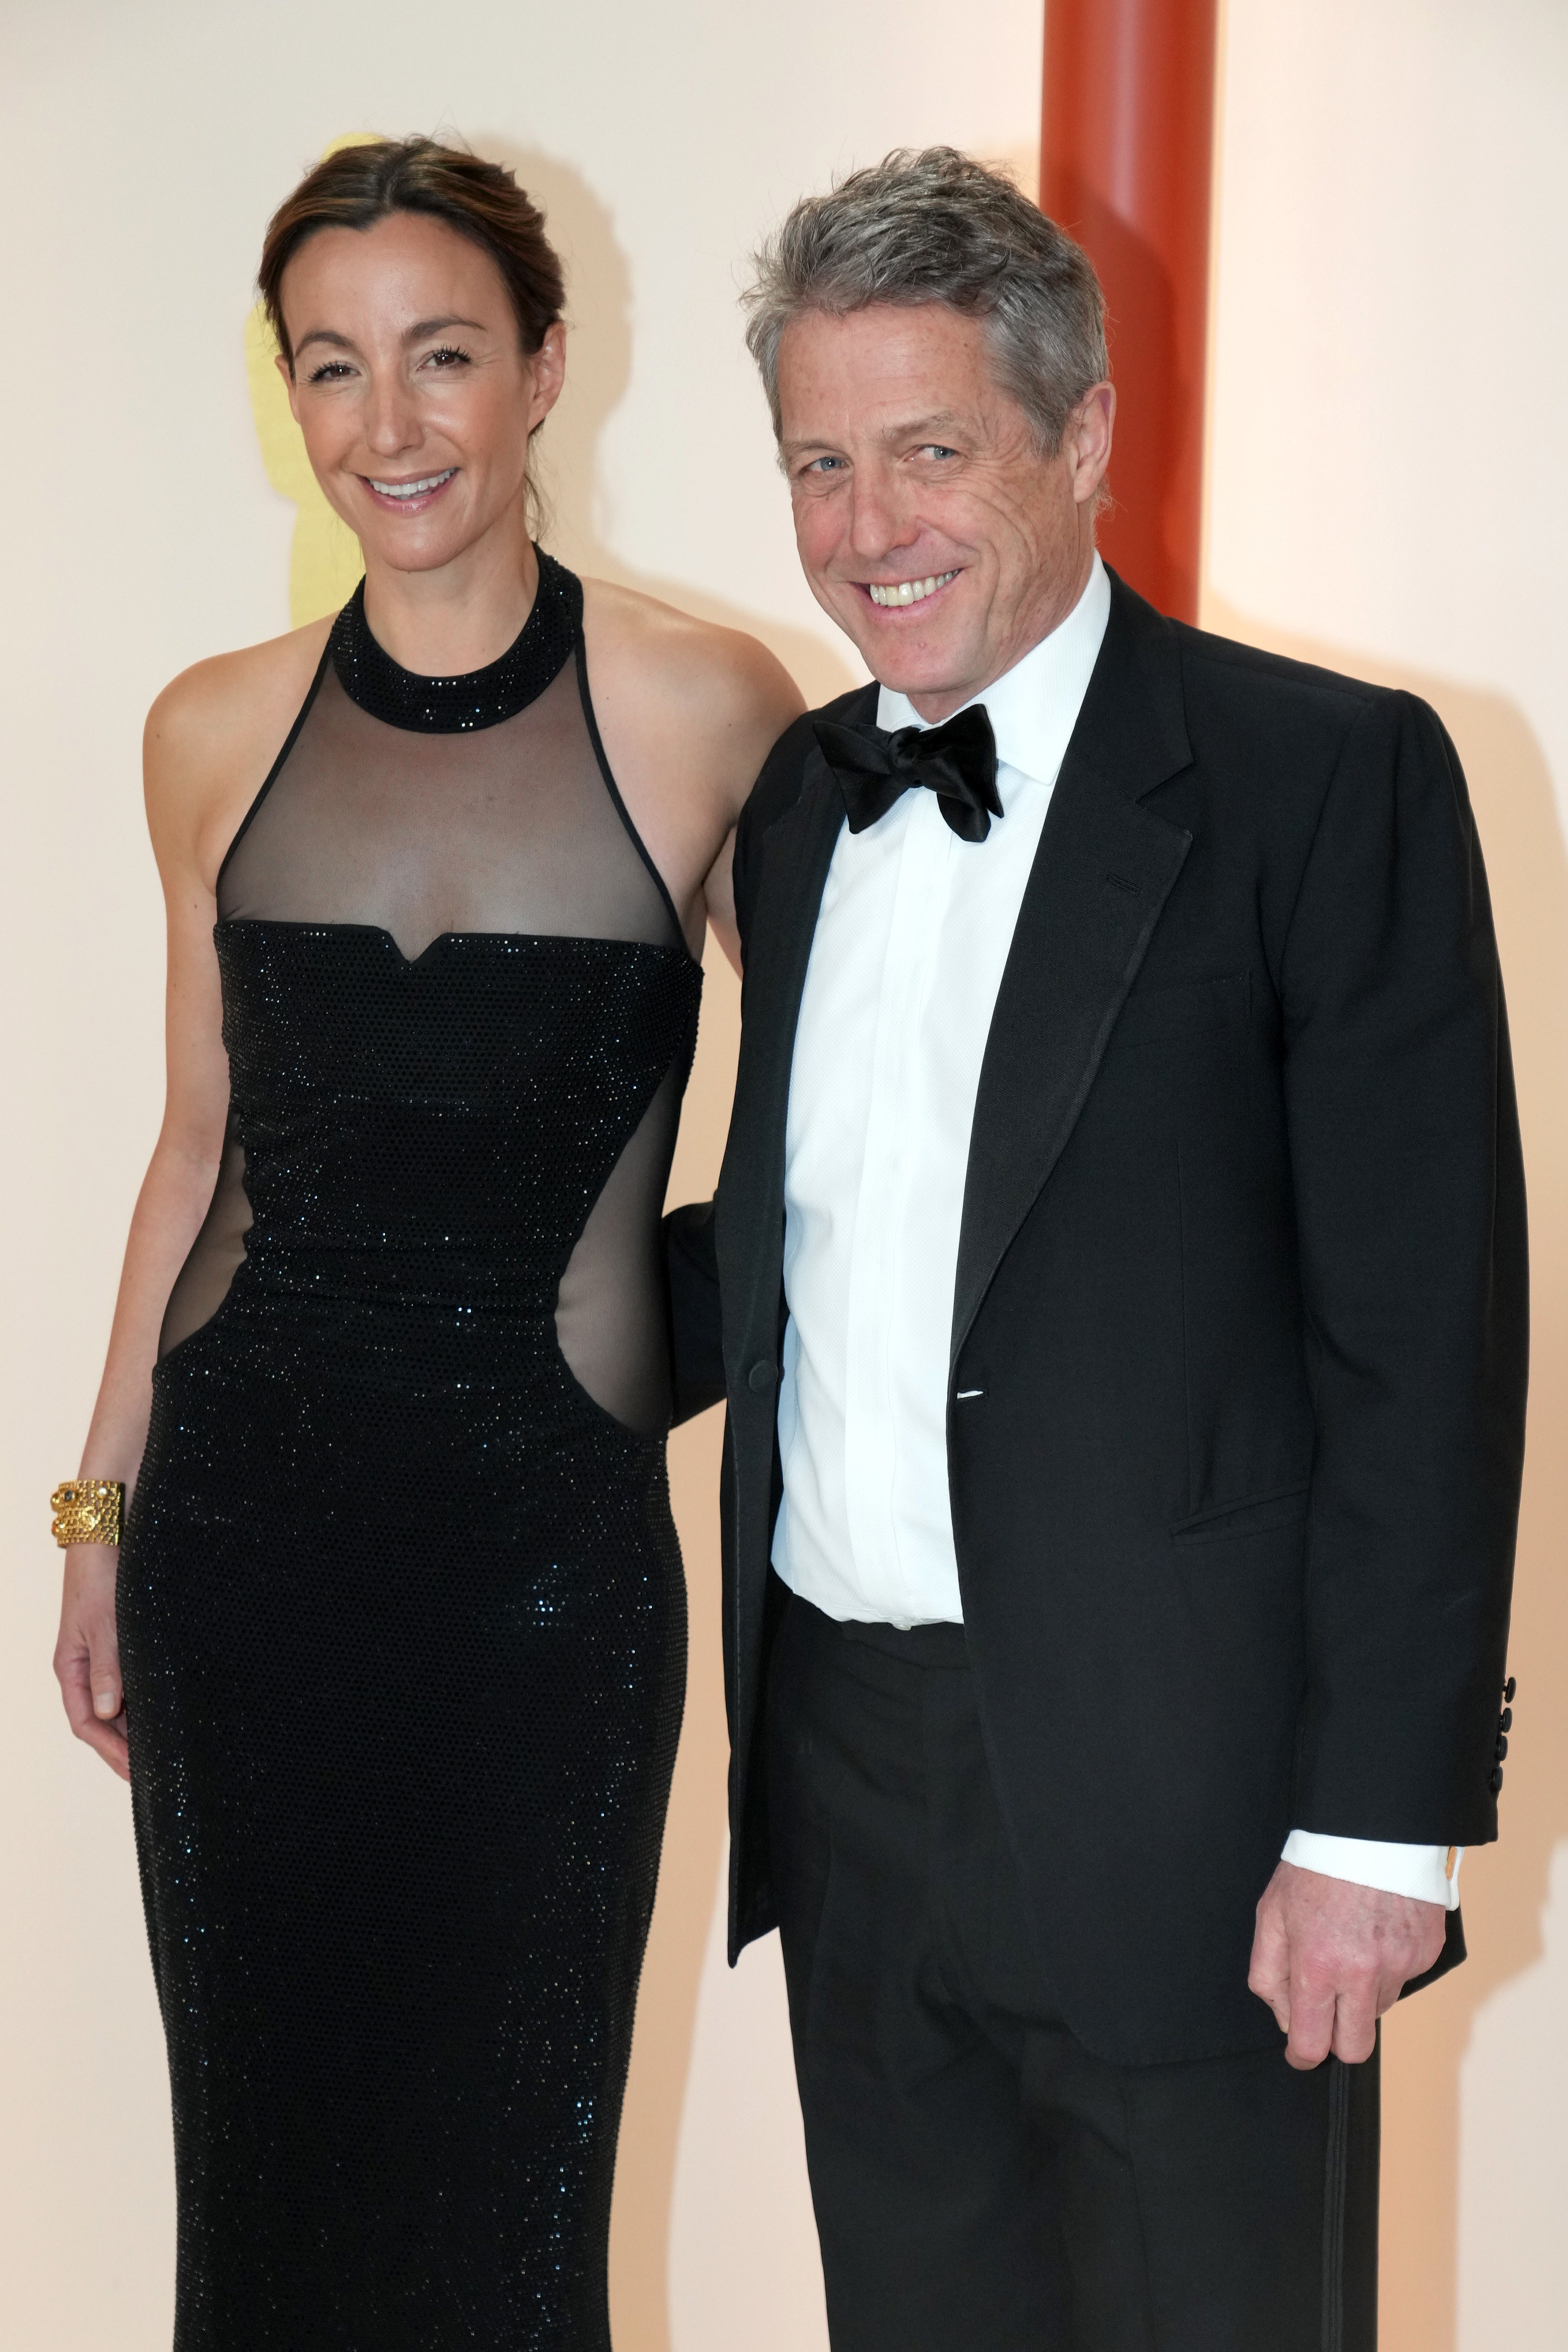 Hugh smiling with wife Anna Eberstein